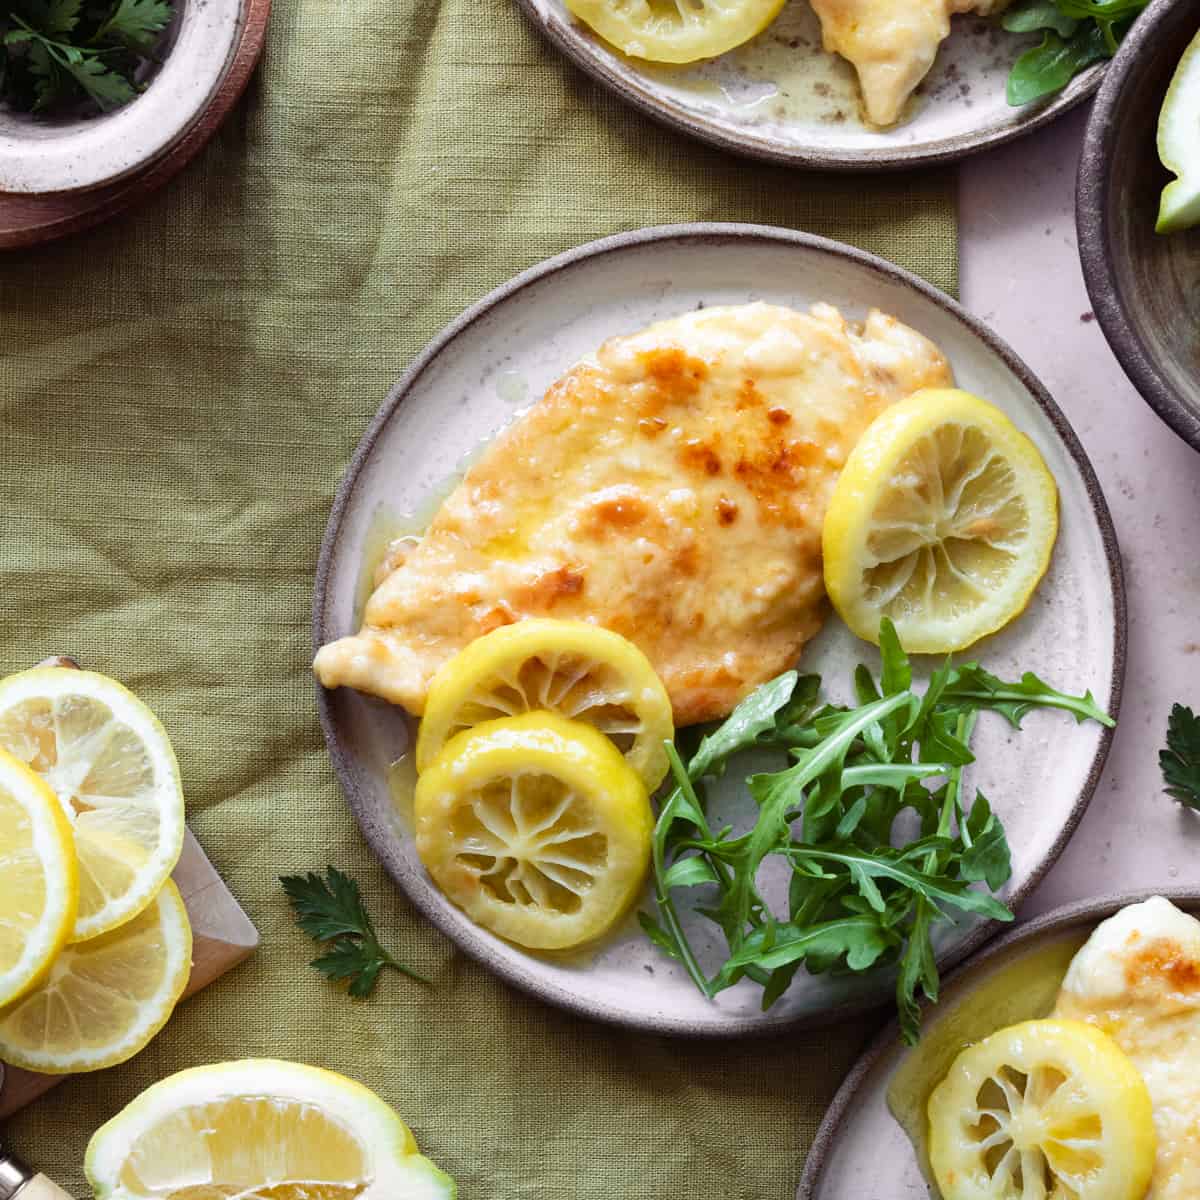 Chicken with lemons and arugula on a plate